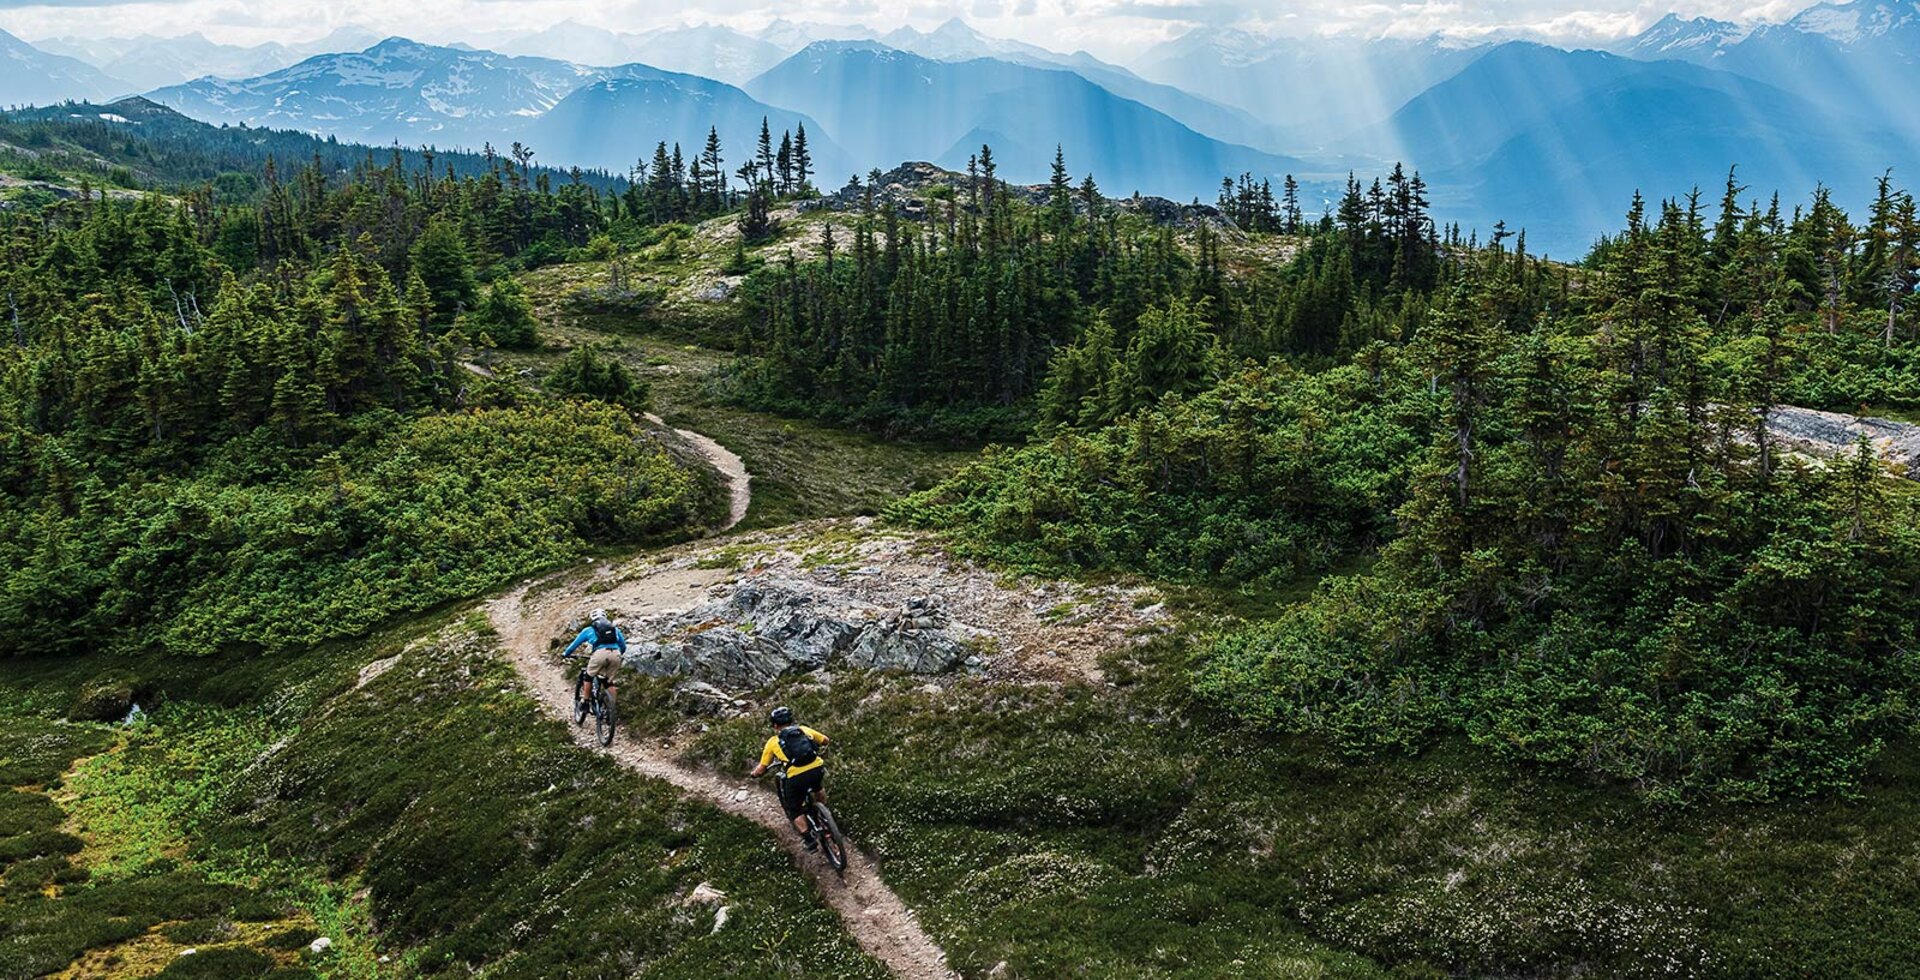 Mitch Roy and Rob Hesse descend the Maroon Mountain trail north of Terrace, British Columbia. This stout out-and-back adventure provides access to some of the region’s most pristine subalpine terrain above Kitsumkalum Lake.